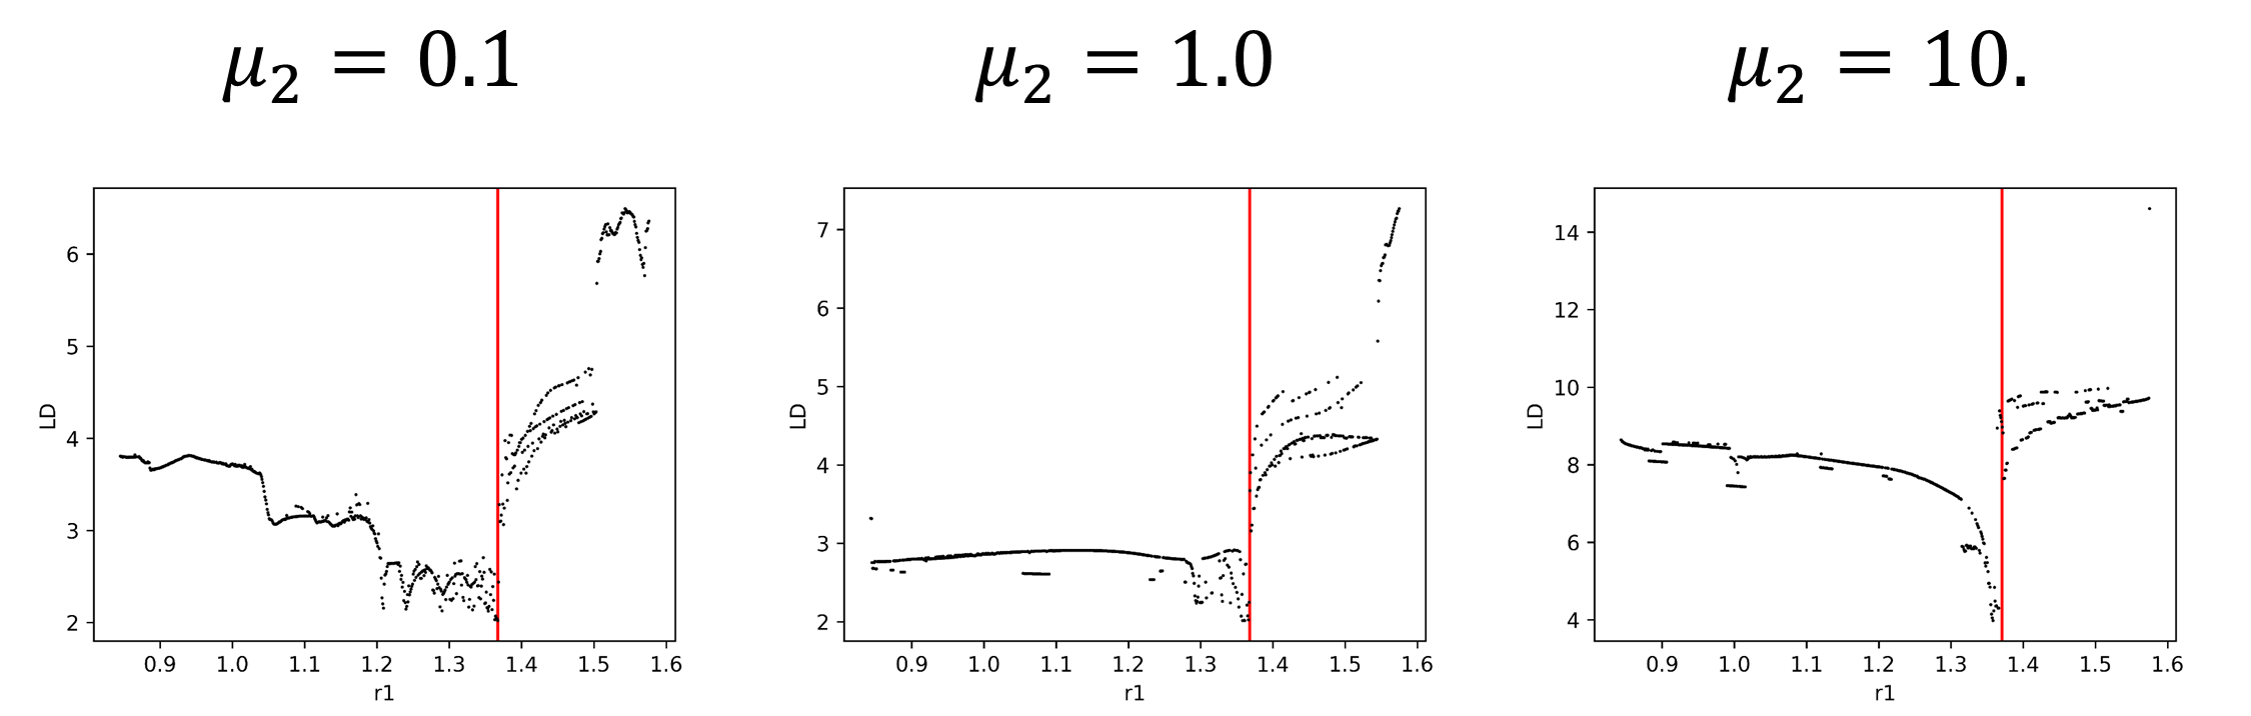 Slice at bath position of 2.2 of the LD values along the reactive coordinate. 